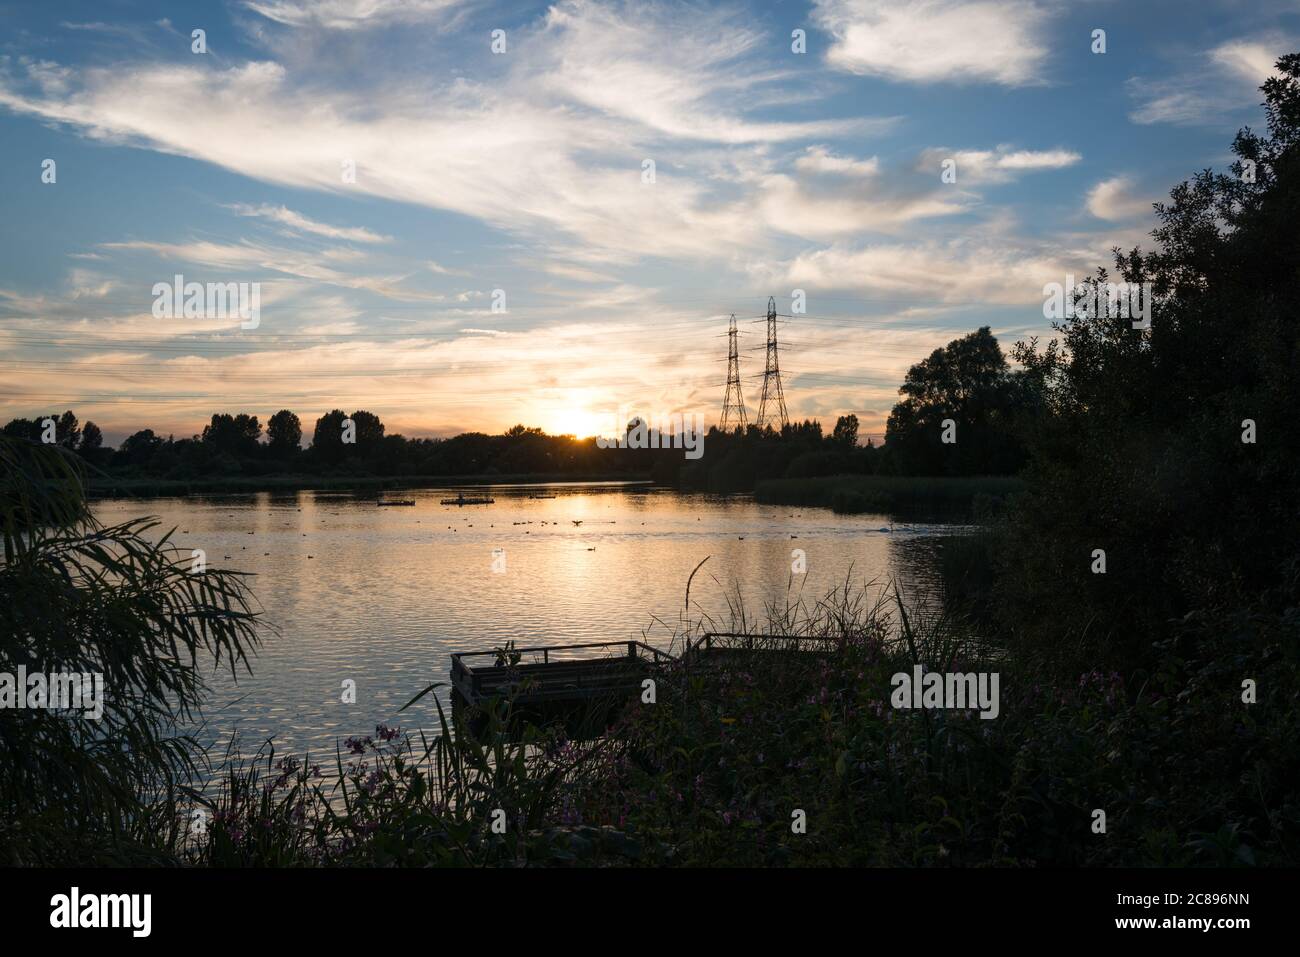 Hooksmarsh lake in the Lee Valley Country Park between Waltham Abbey and Cheshunt on the Essex/Hertfordshire border, England, UK Stock Photo